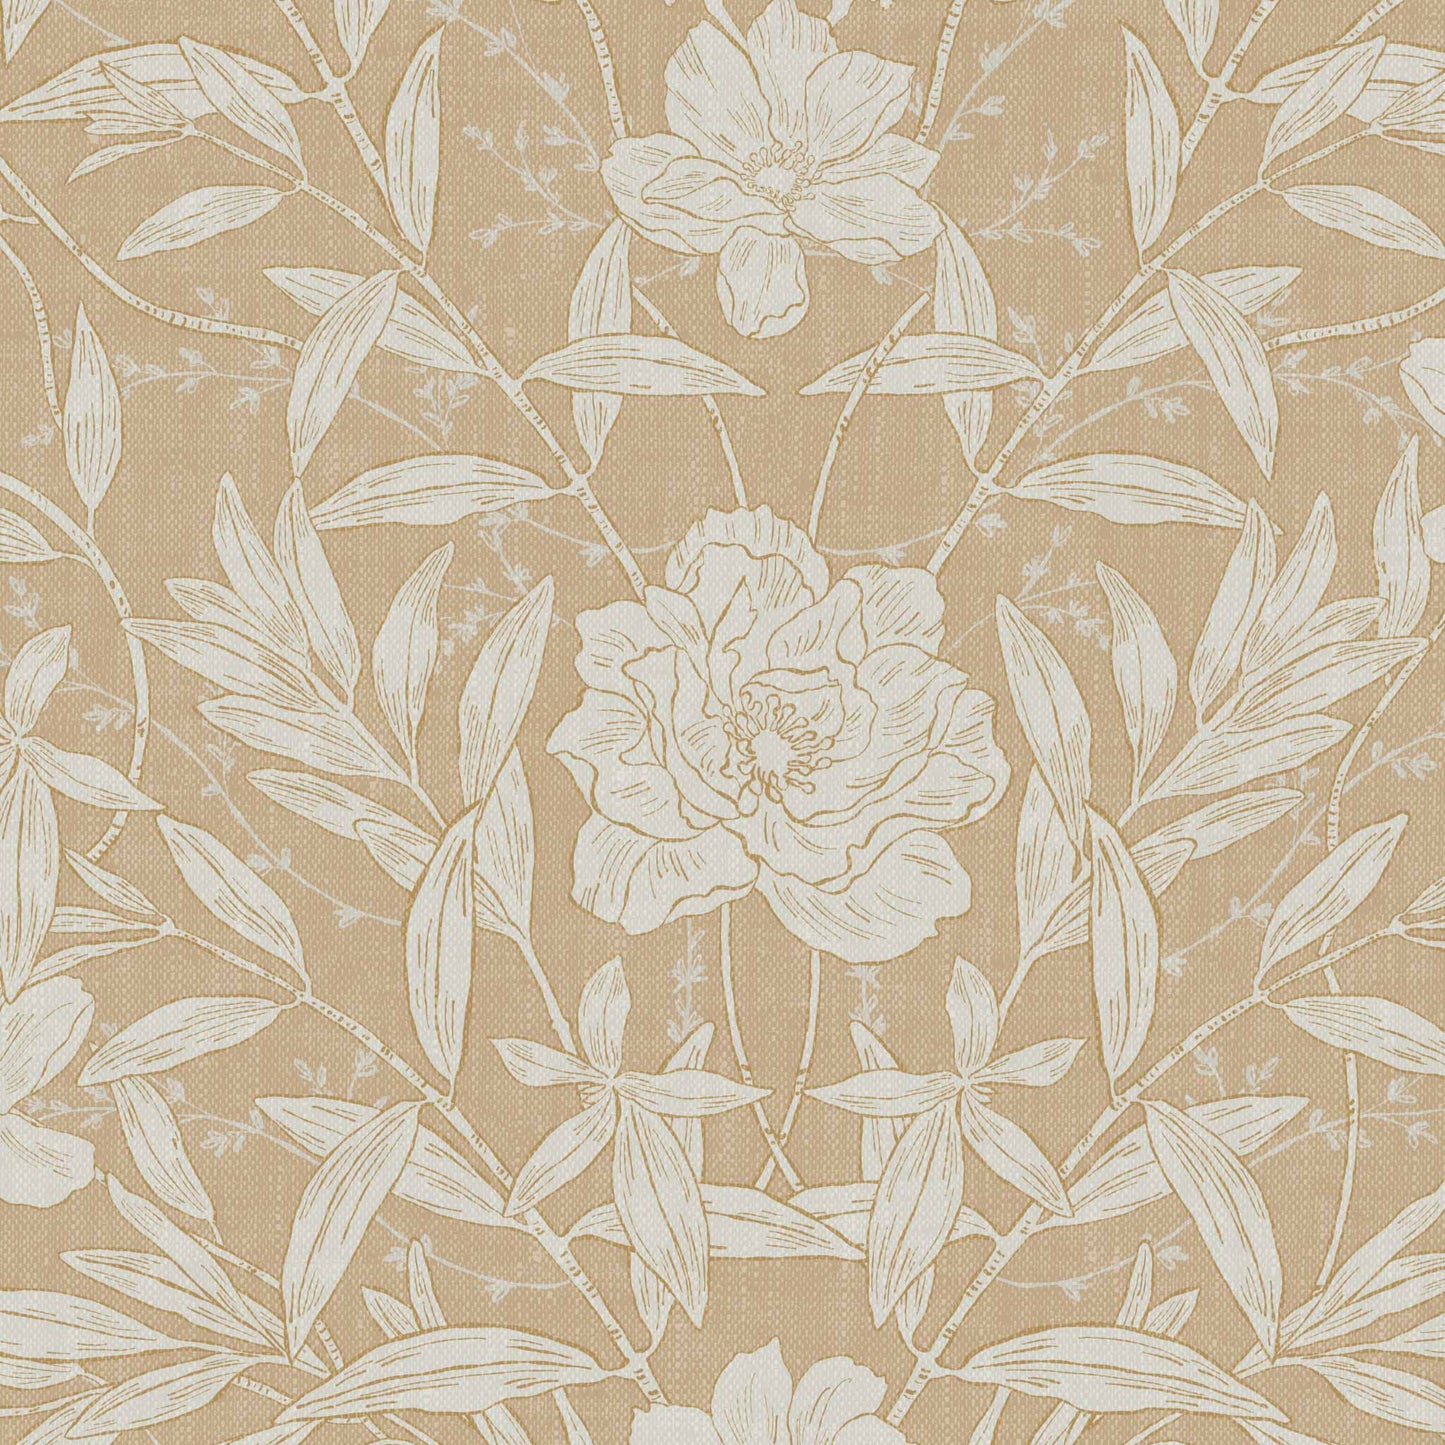 Our luxurious Peony Garden Wallpaper in Tan adds a majestic touch of sophistication to any space. Its distinctive classic peonies are guaranteed to add a sense of elegance to any wall. 